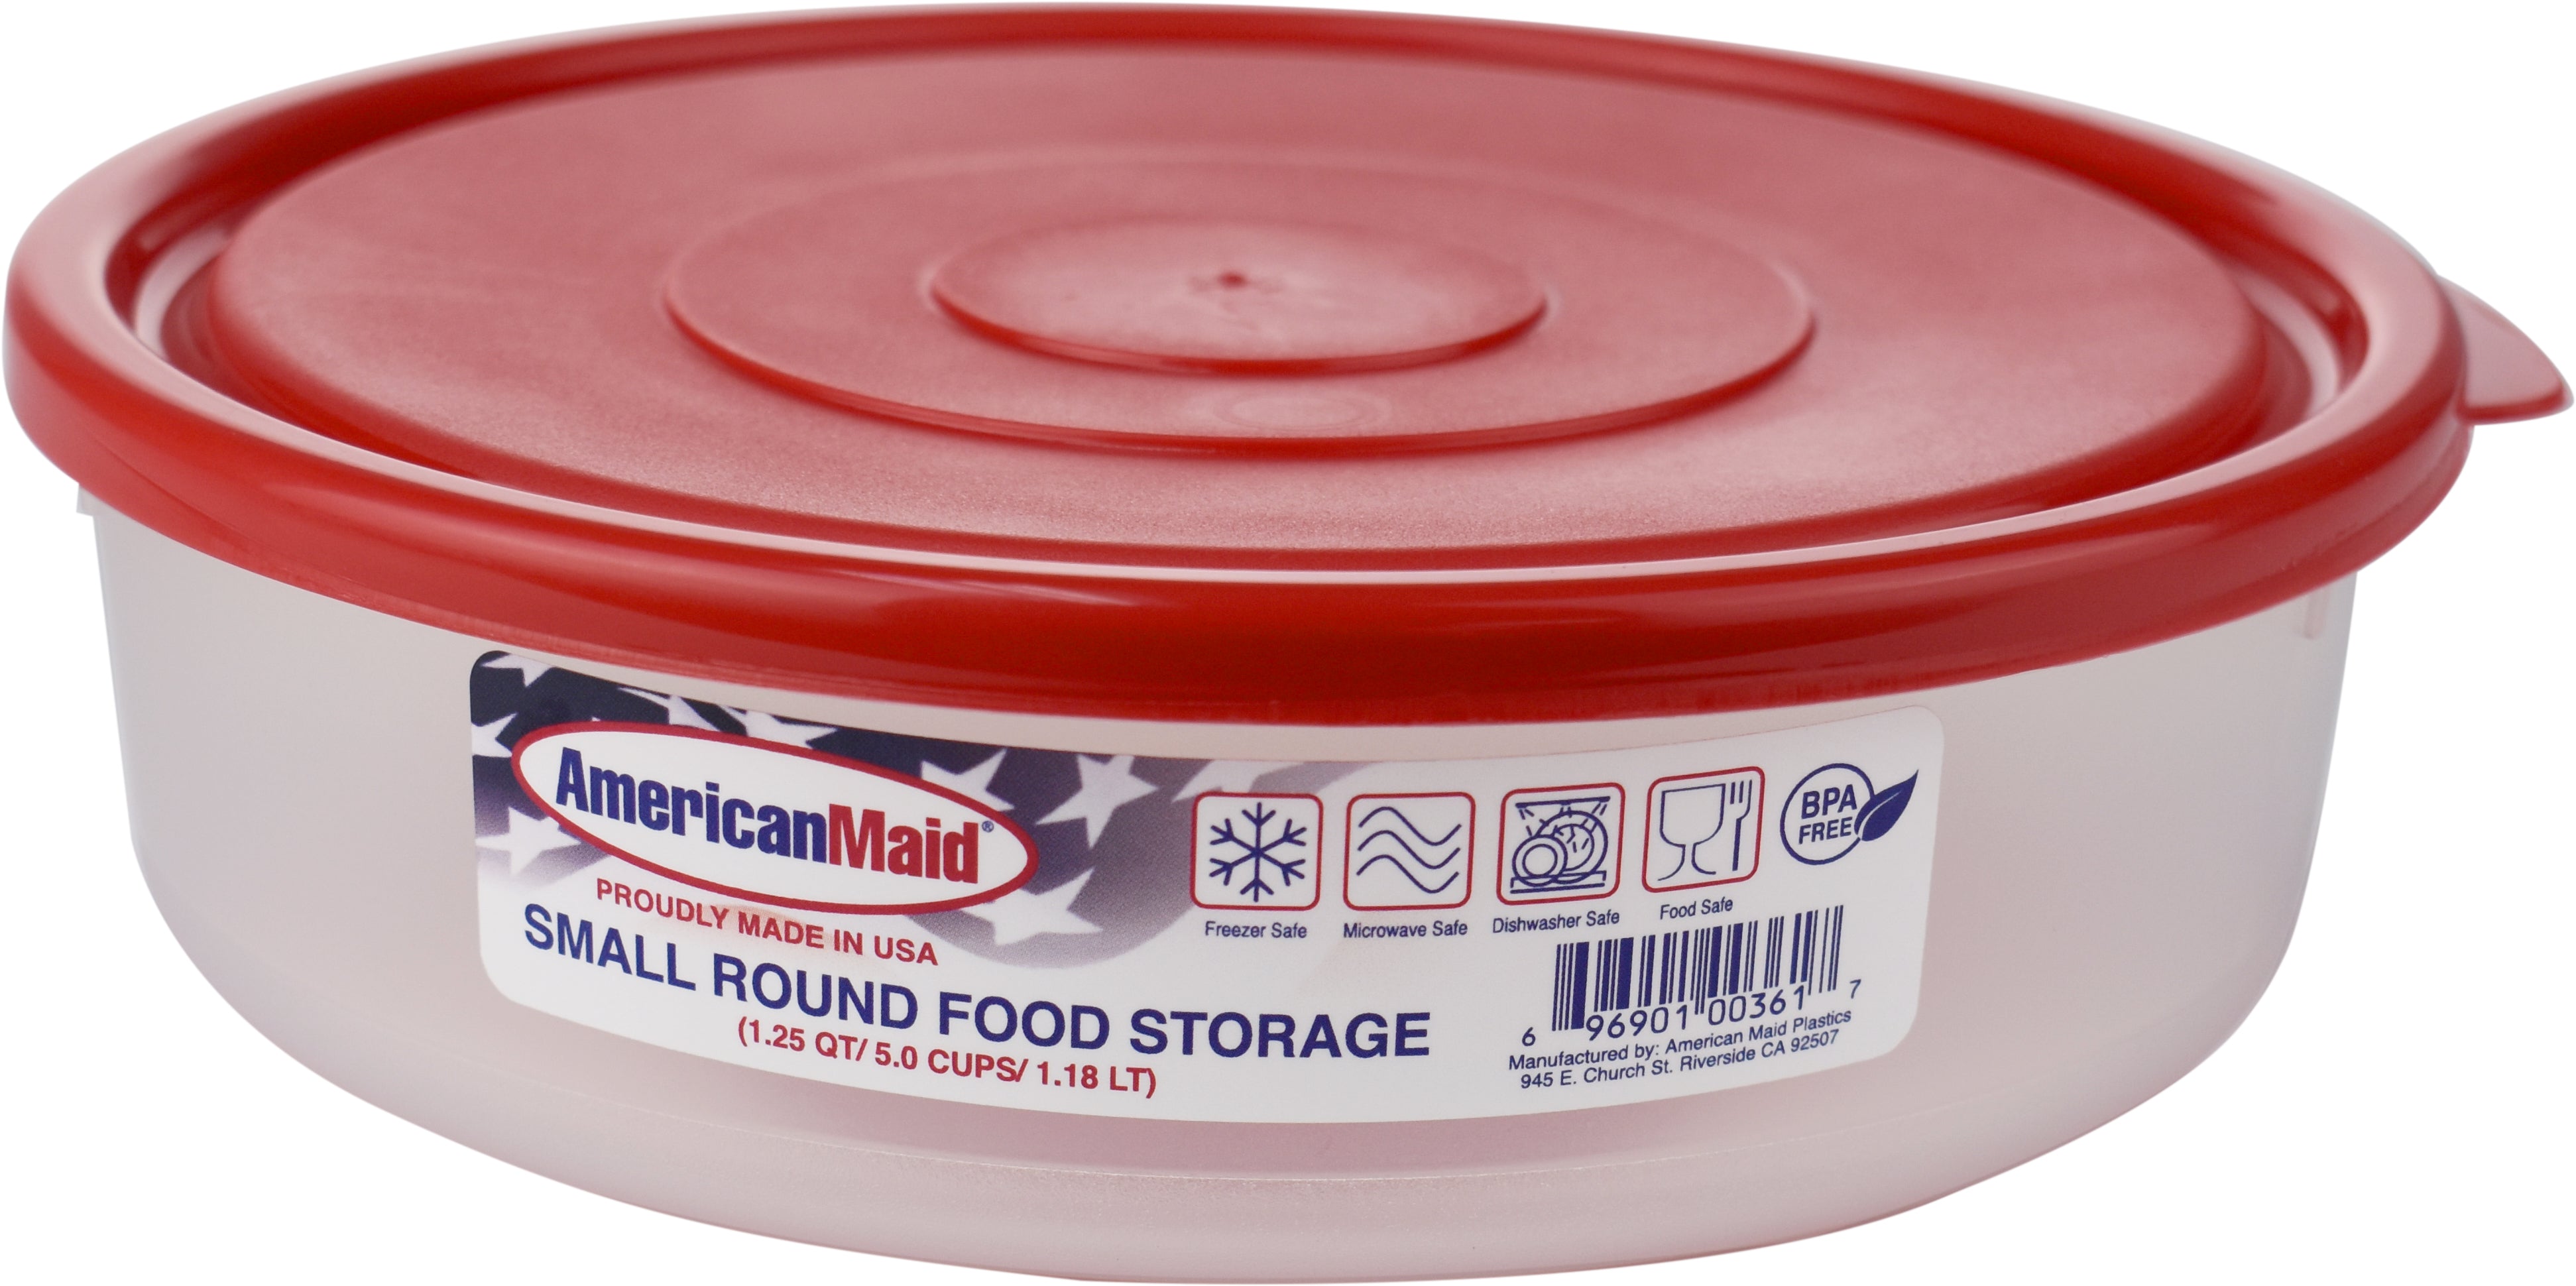 Small and round food storage container (1.25 QT/ 5.0 CUPS/ 1.18 LT) Set of 6